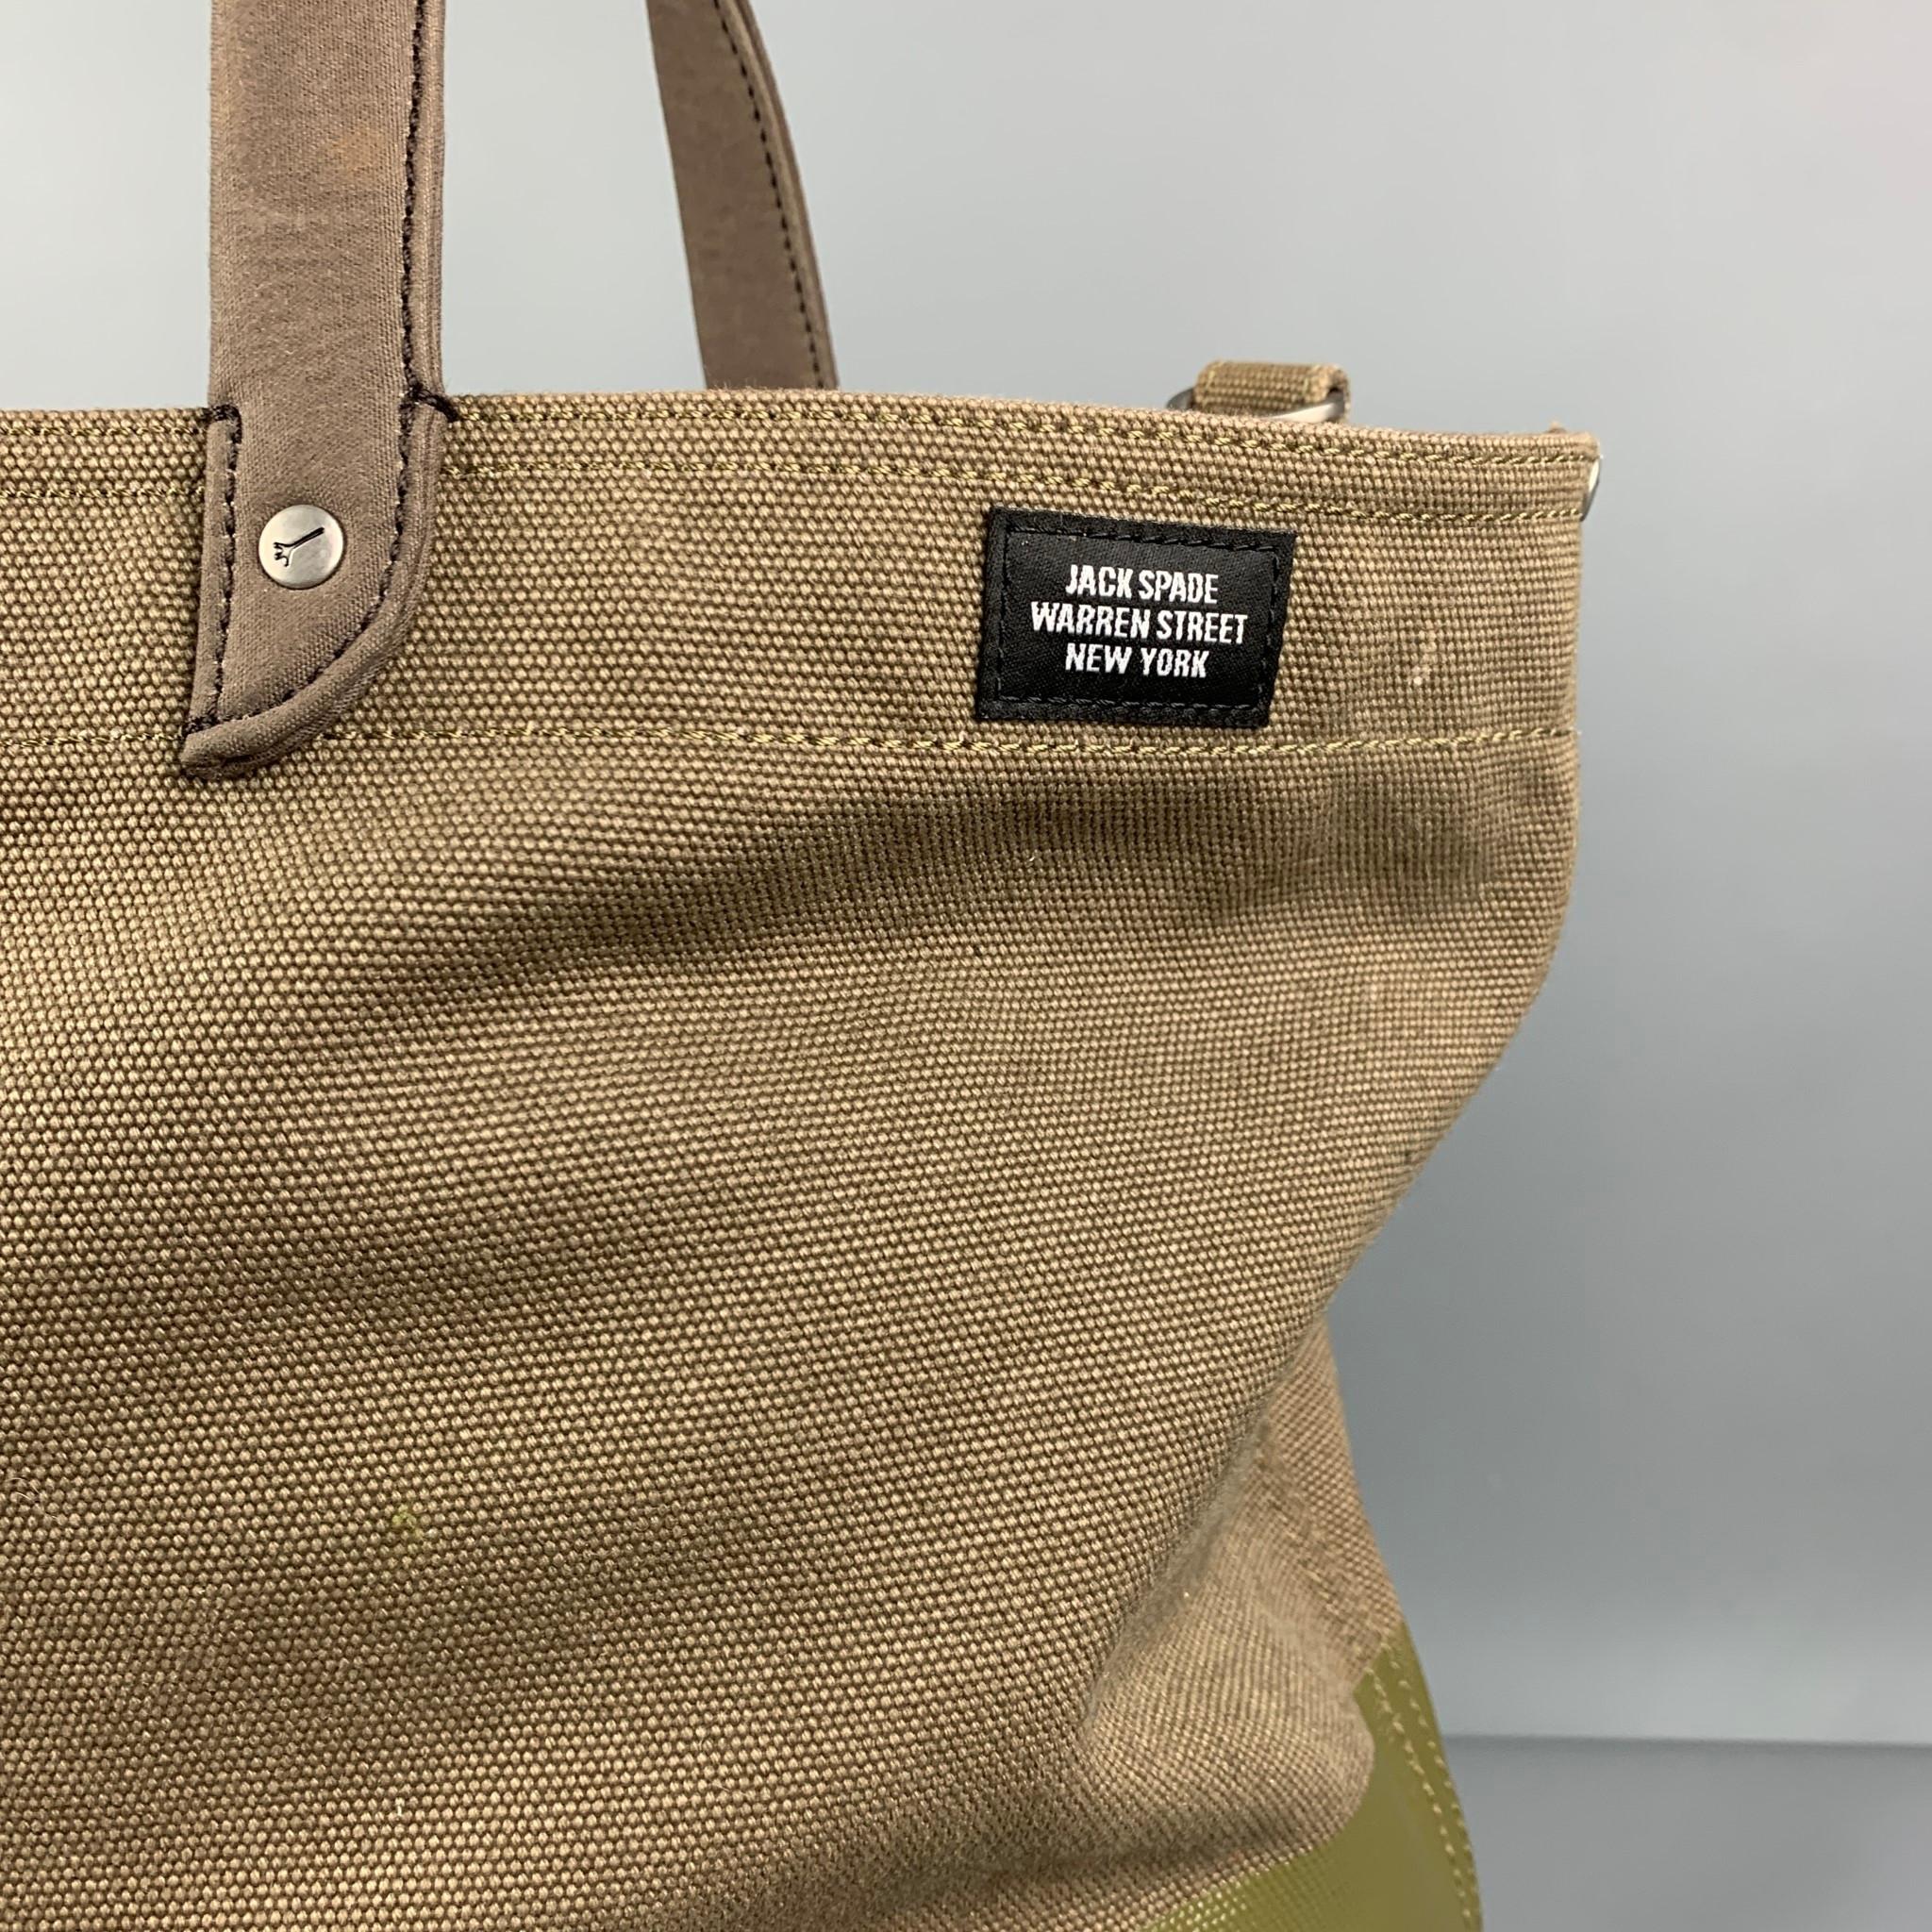 JACK SPADE bag comes in a olive two toned canvas featuring a tote style, detachable strap, inner pocket, and top handles. 

Good Pre-Owned Condition. Minor marks and discoloration at interior.

Measurements:

Length: 15.25 in.
Width: 6 in.
Height: